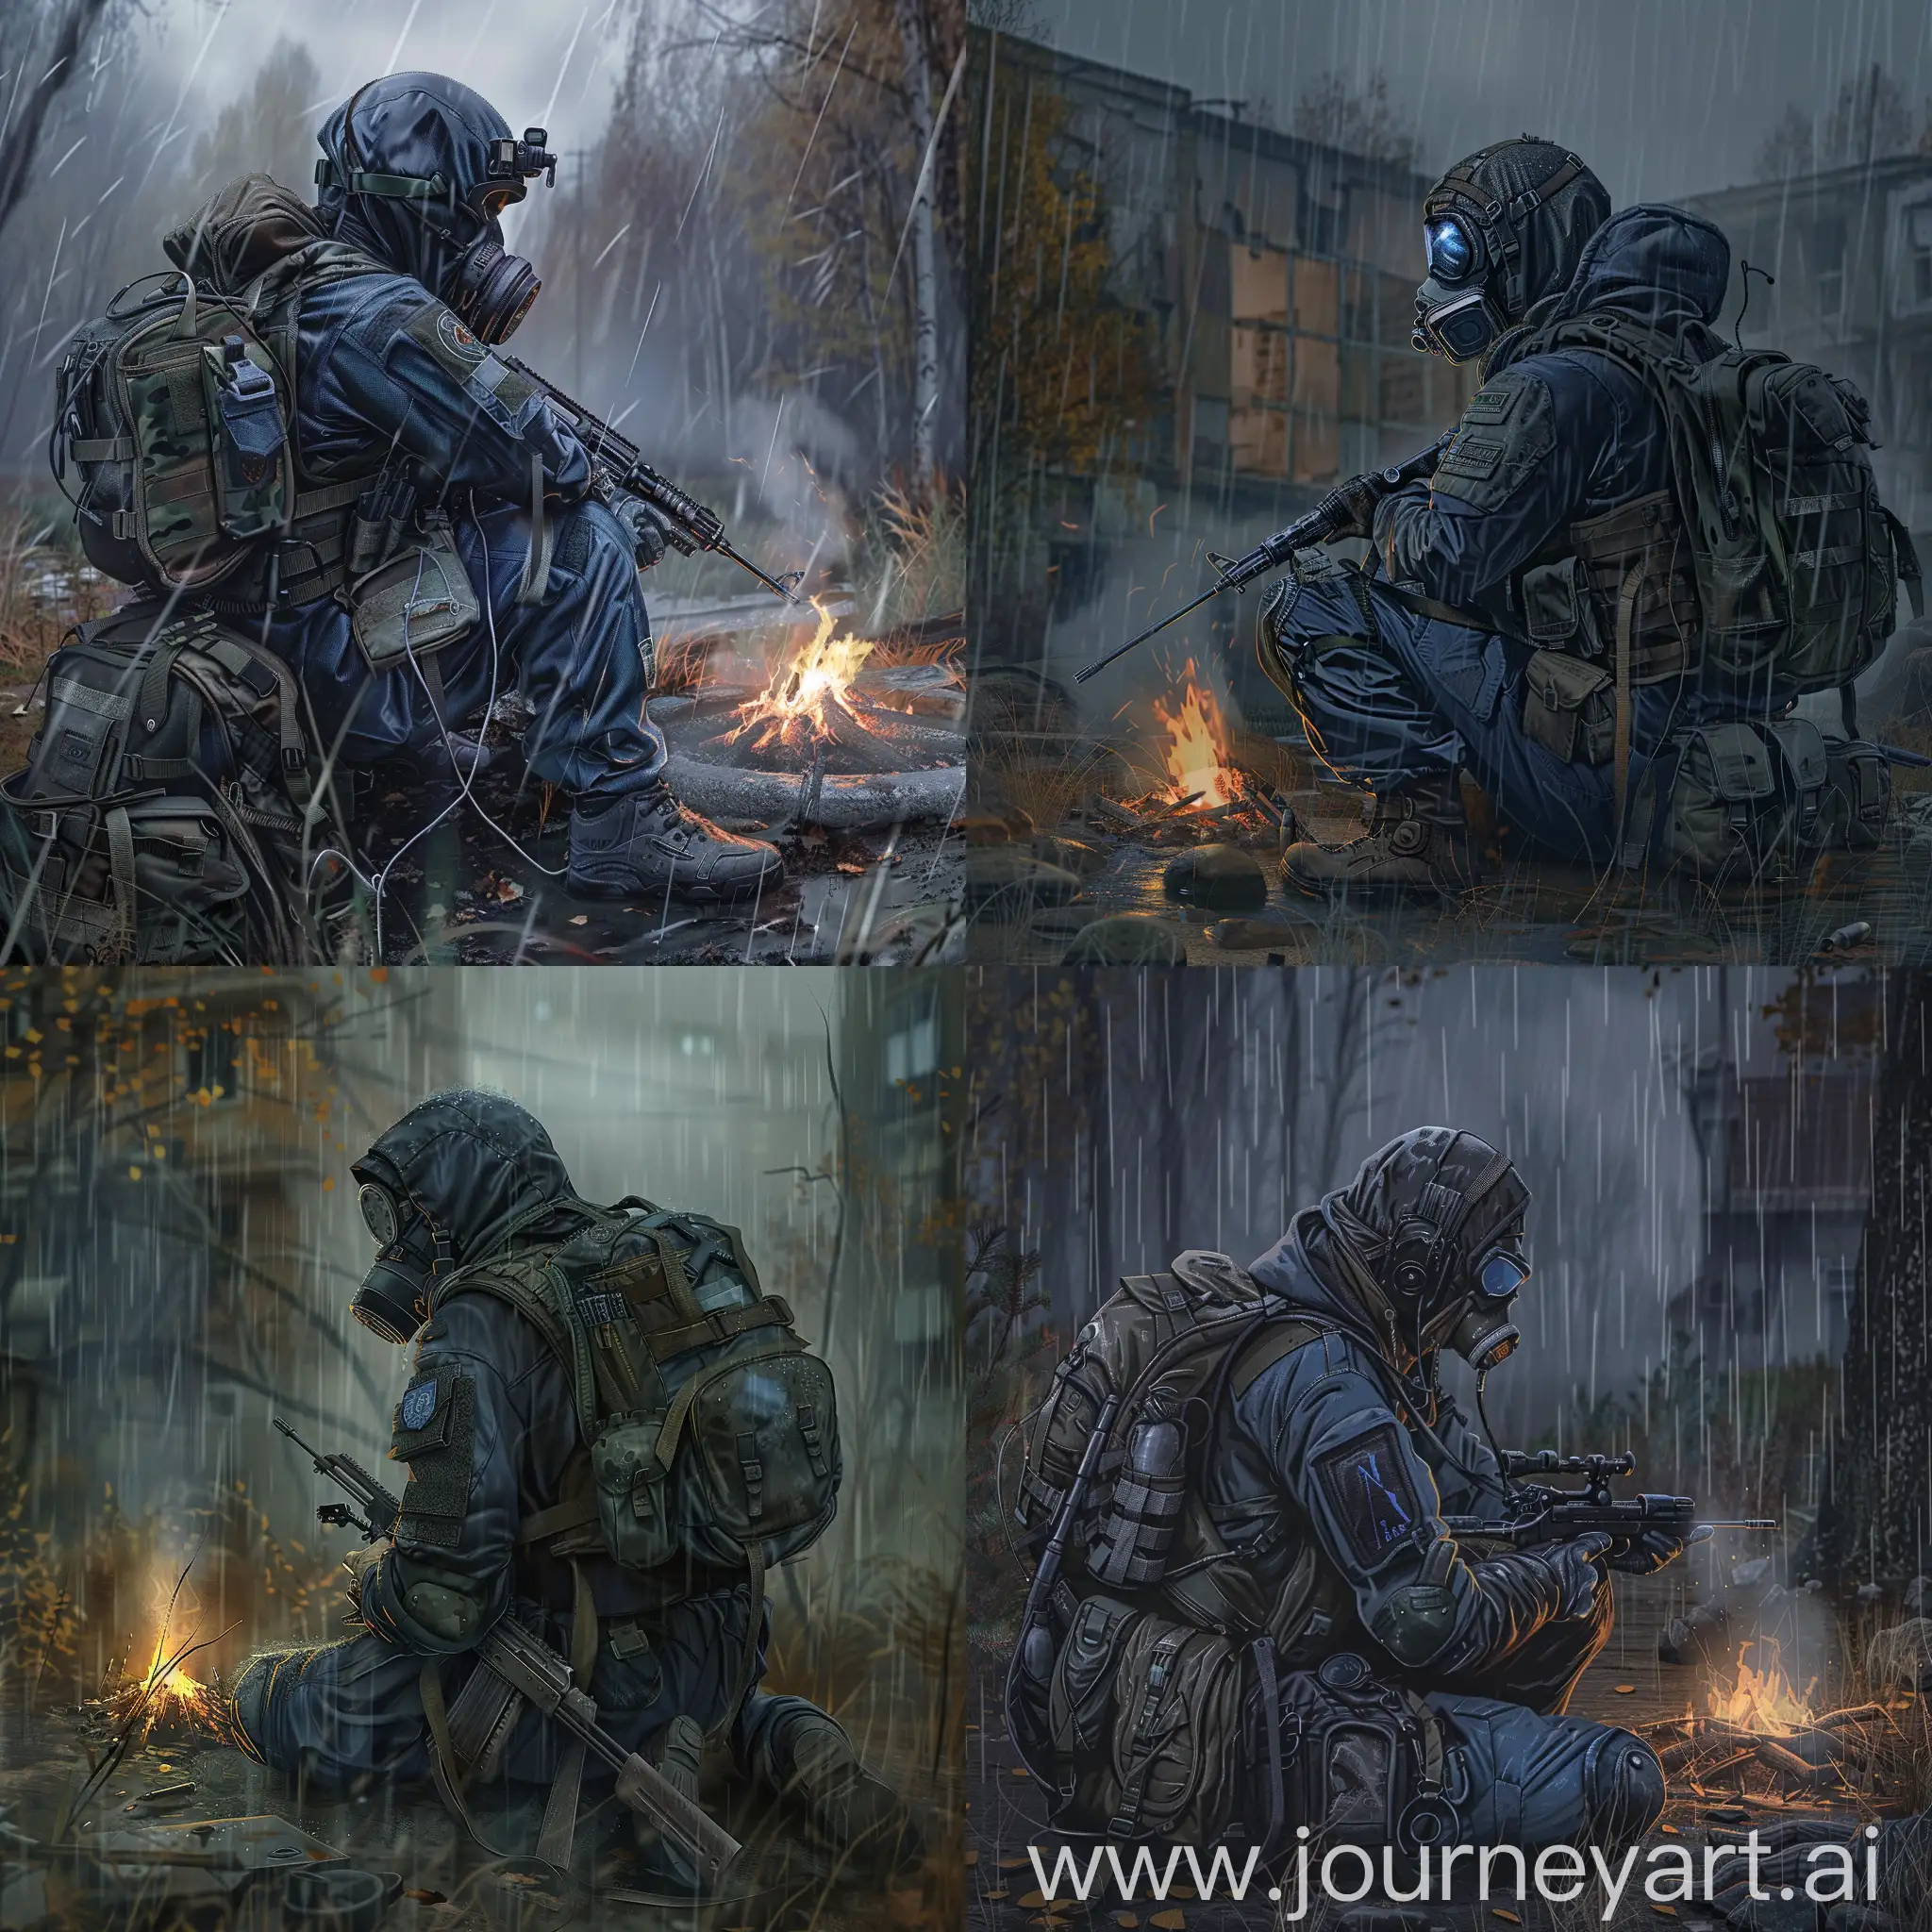 Digital art is a lone mercenary from the universe of S.T.A.L.K.E.R., dressed in a dark blue military jumpsuit, gray military armor on his body, a respirator on his face, a military backpack on his back, sniper rifle in hands, he sitting by the campfire in abandoned soviet bilding, gloomy raining autumn.